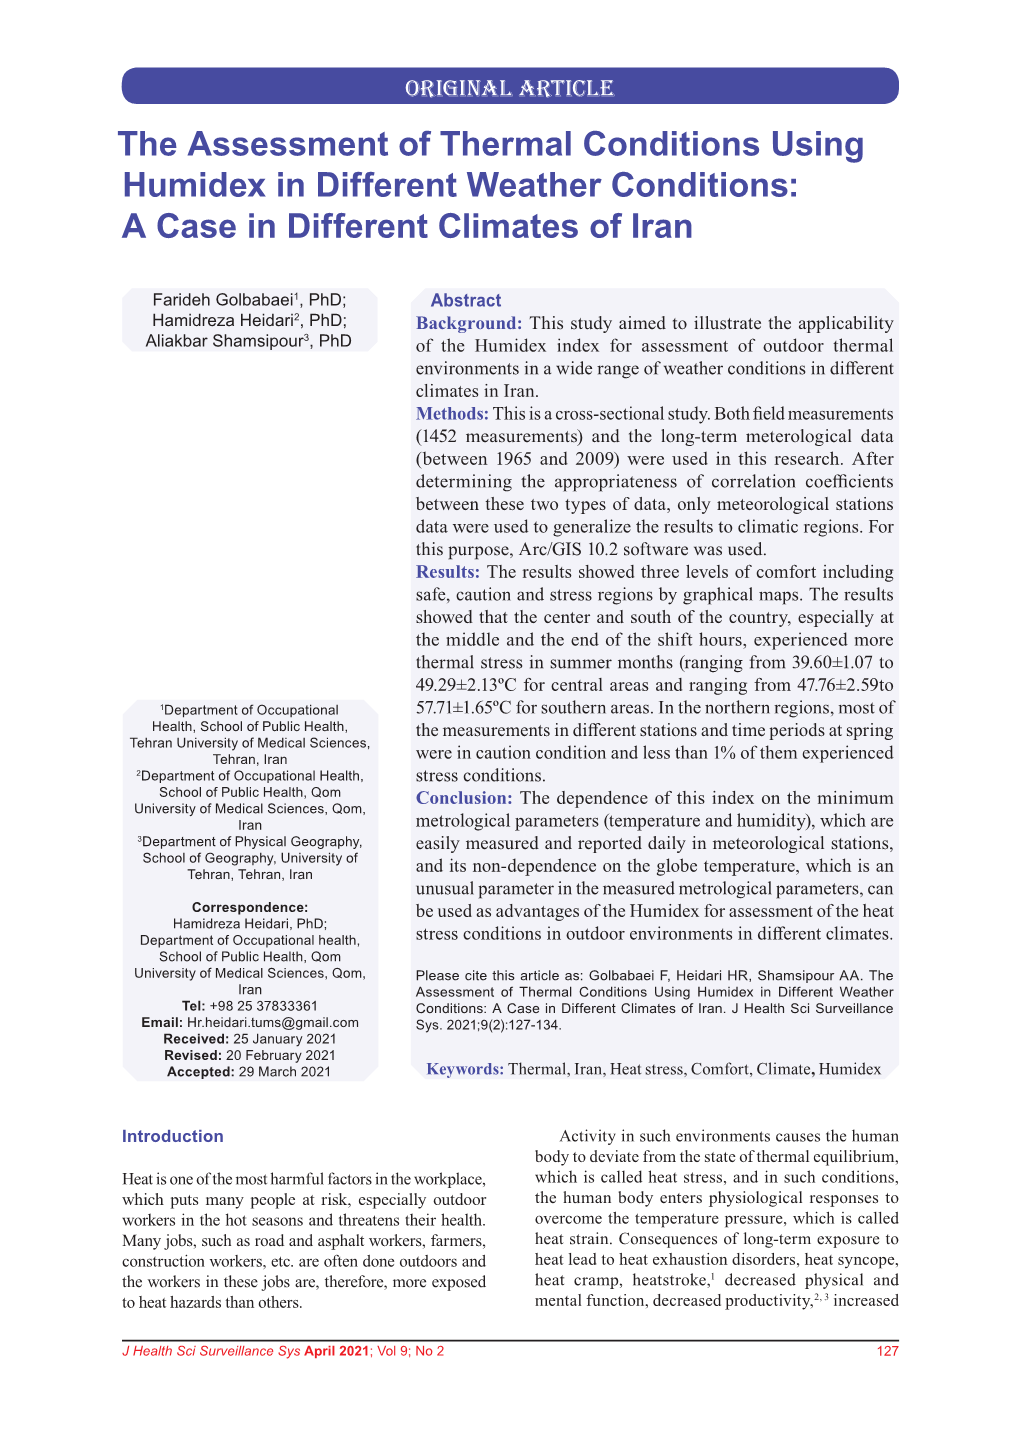 The Assessment of Thermal Conditions Using Humidex in Different Weather Conditions: a Case in Different Climates of Iran